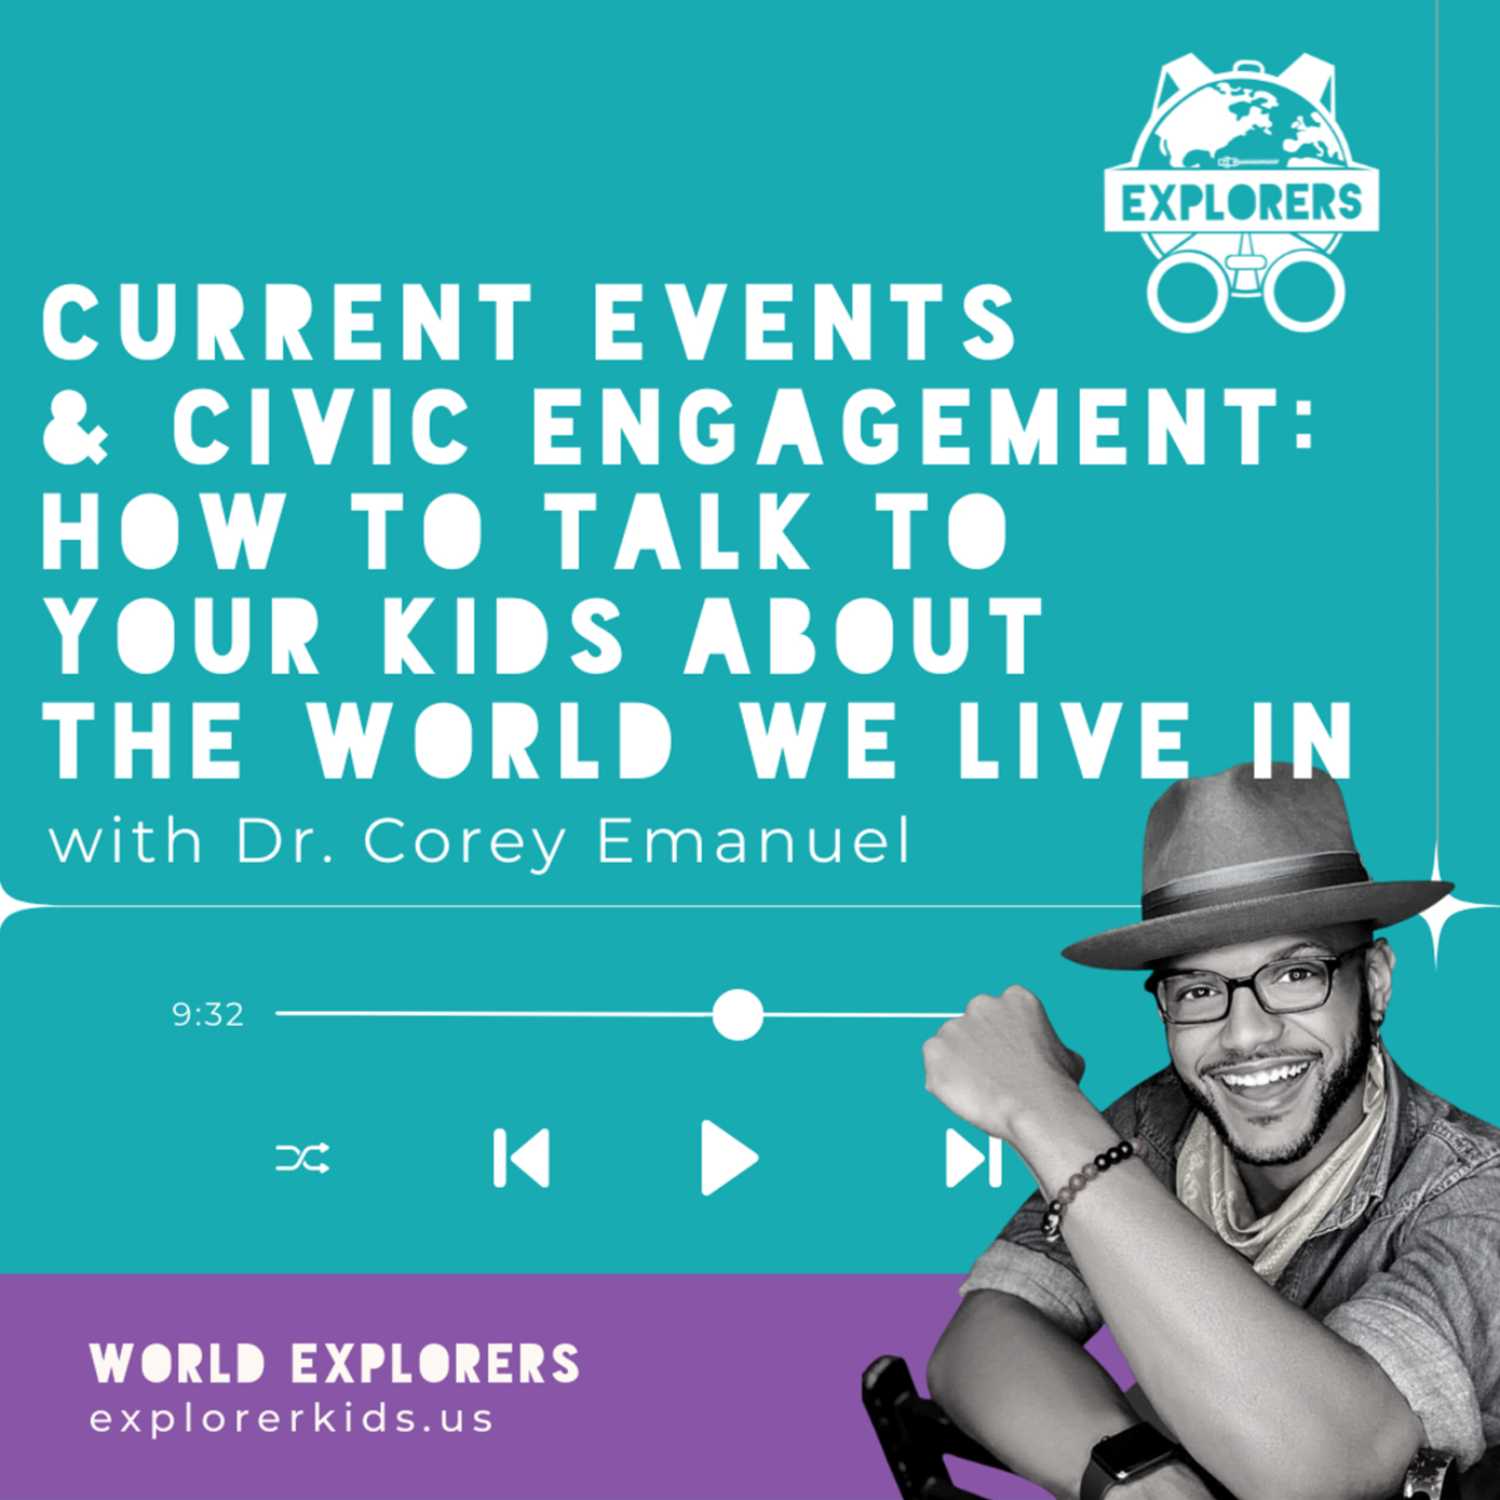 Current Events & Civic Engagement: How to Talk to Your Kids about the World We Live In